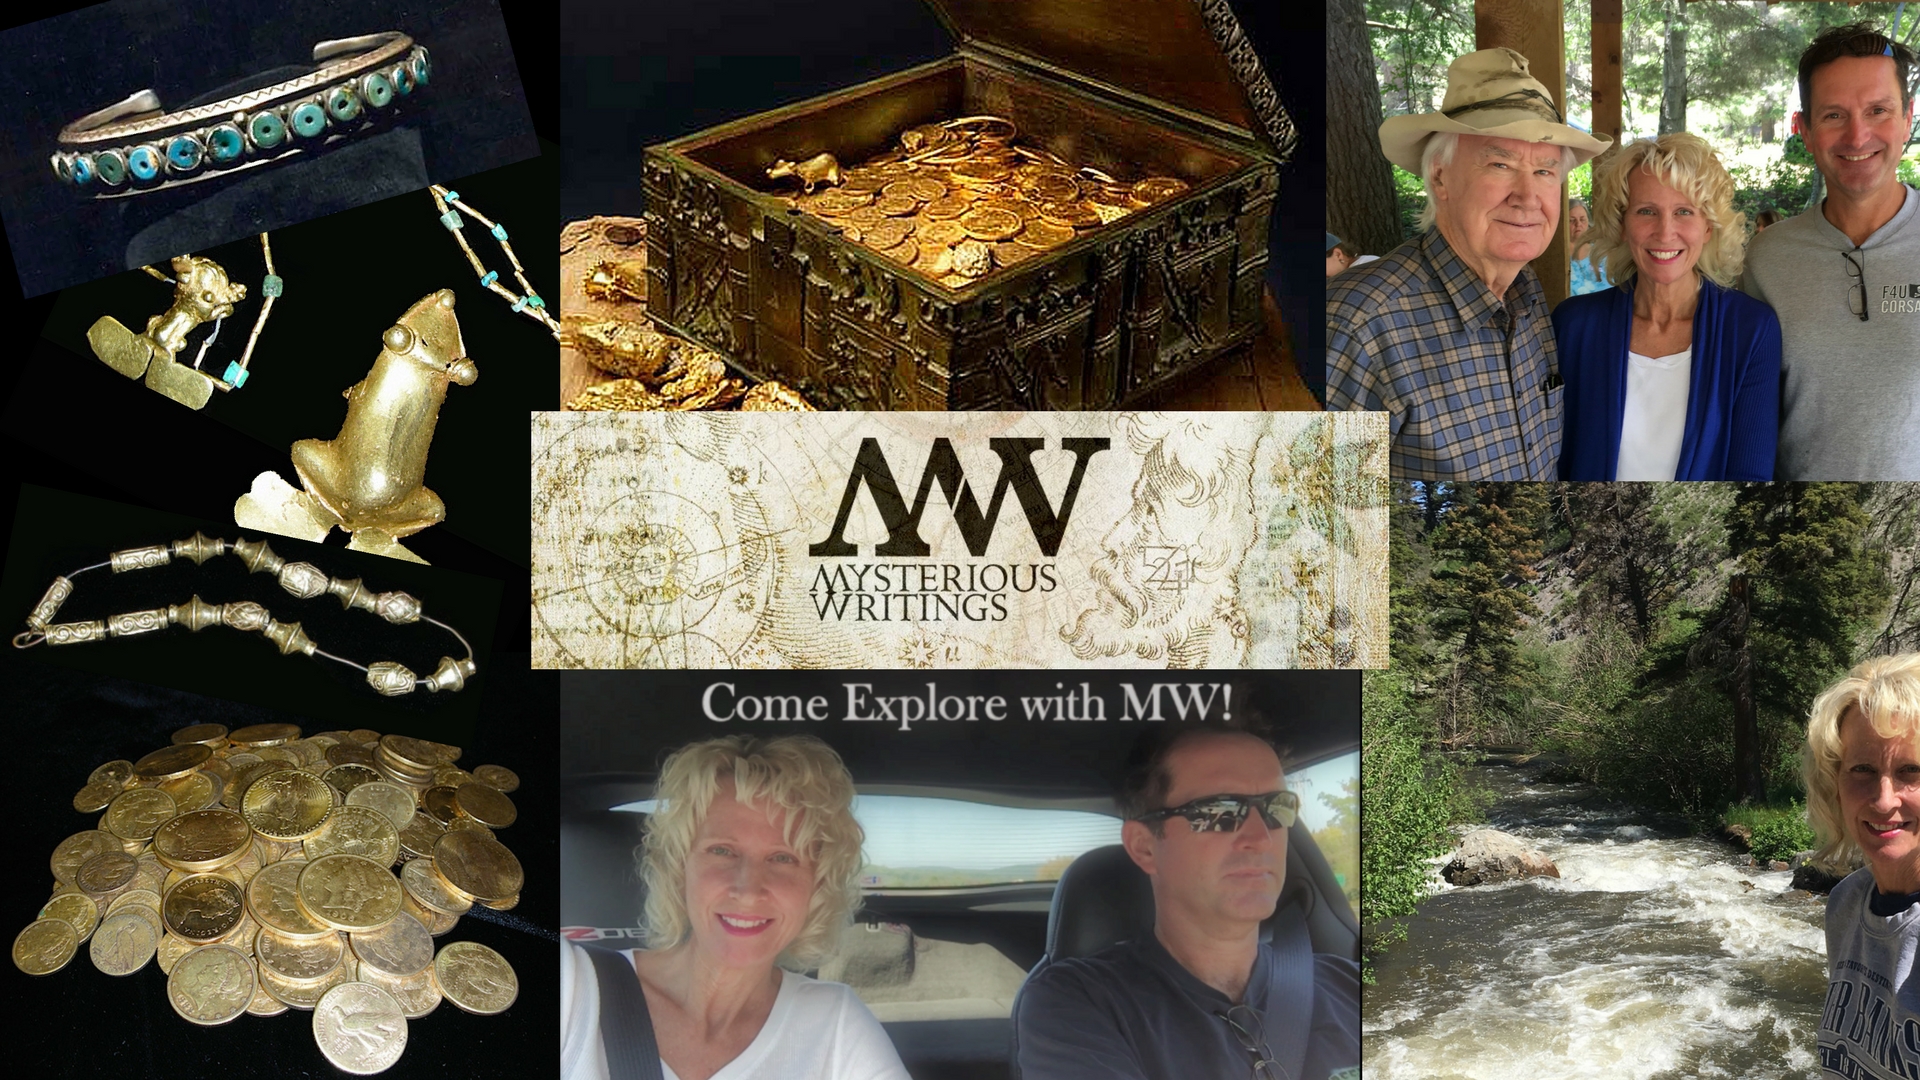 MW Videos: Forrest Fenn Treasure Facts, Contents of Treasure Chest, and Safety Tips